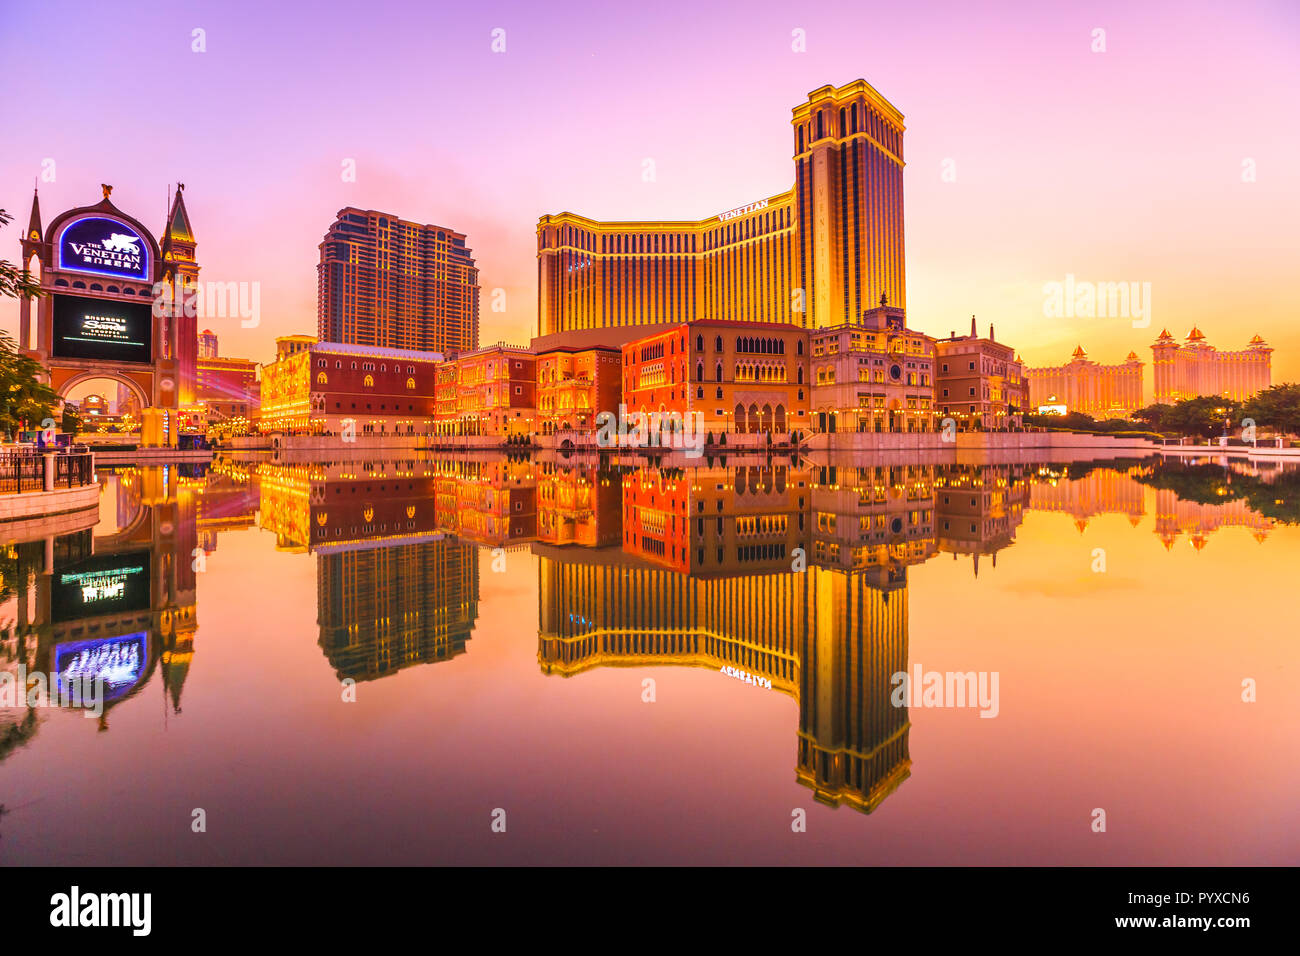 Macau, China - December 8, 2016: The Venetian Macao Sunset reflecting in the lake. The largest casino in the world. Stock Photo